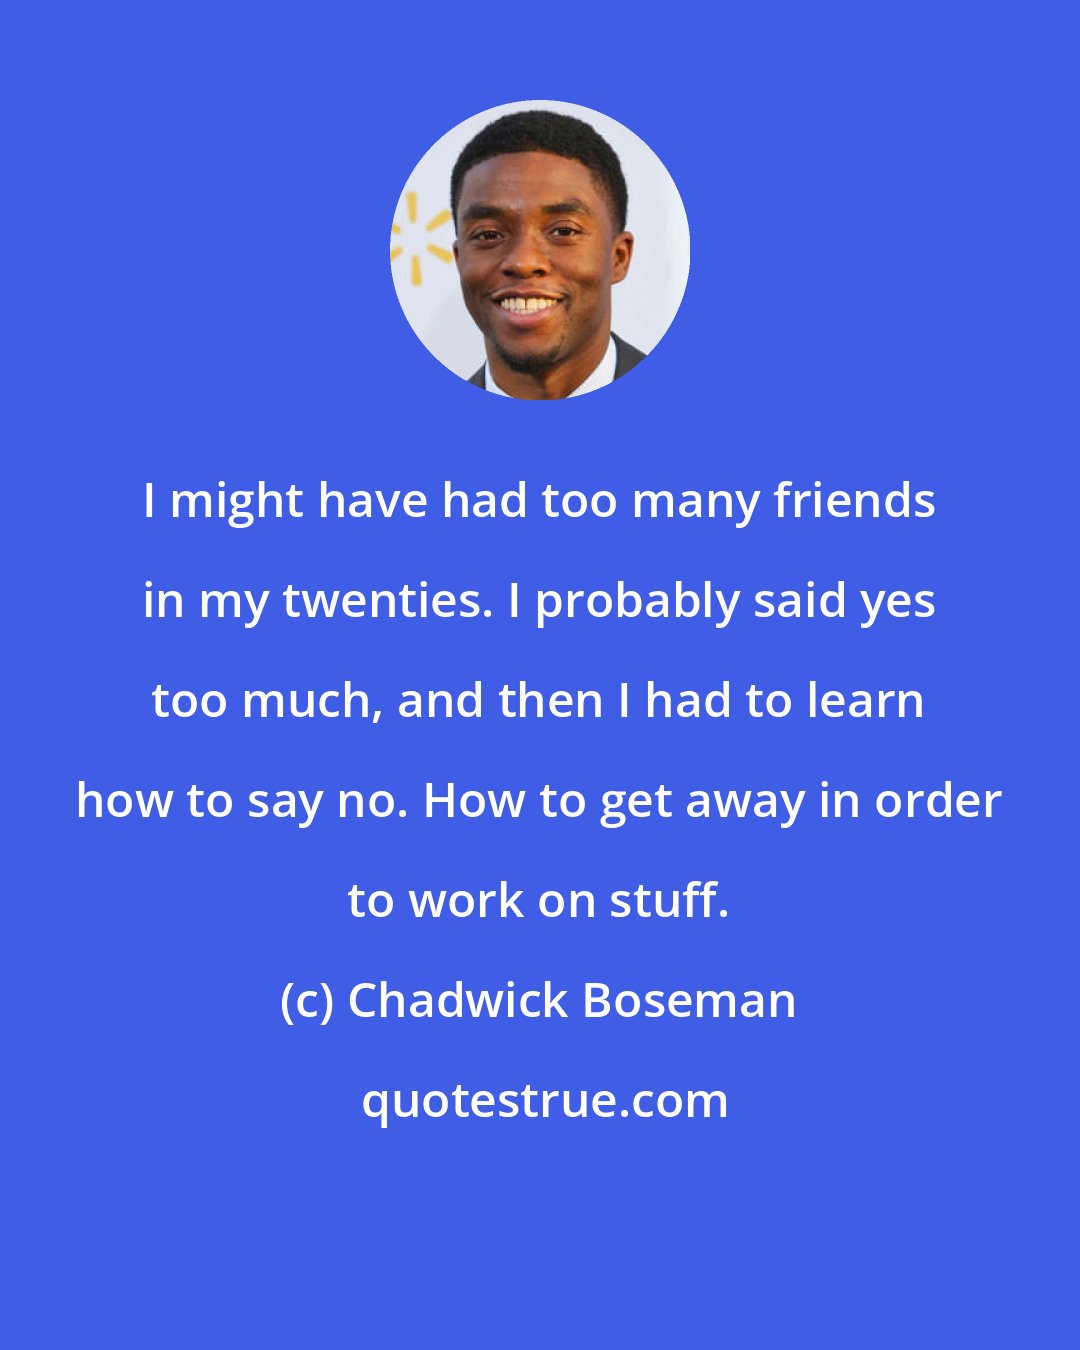 Chadwick Boseman: I might have had too many friends in my twenties. I probably said yes too much, and then I had to learn how to say no. How to get away in order to work on stuff.